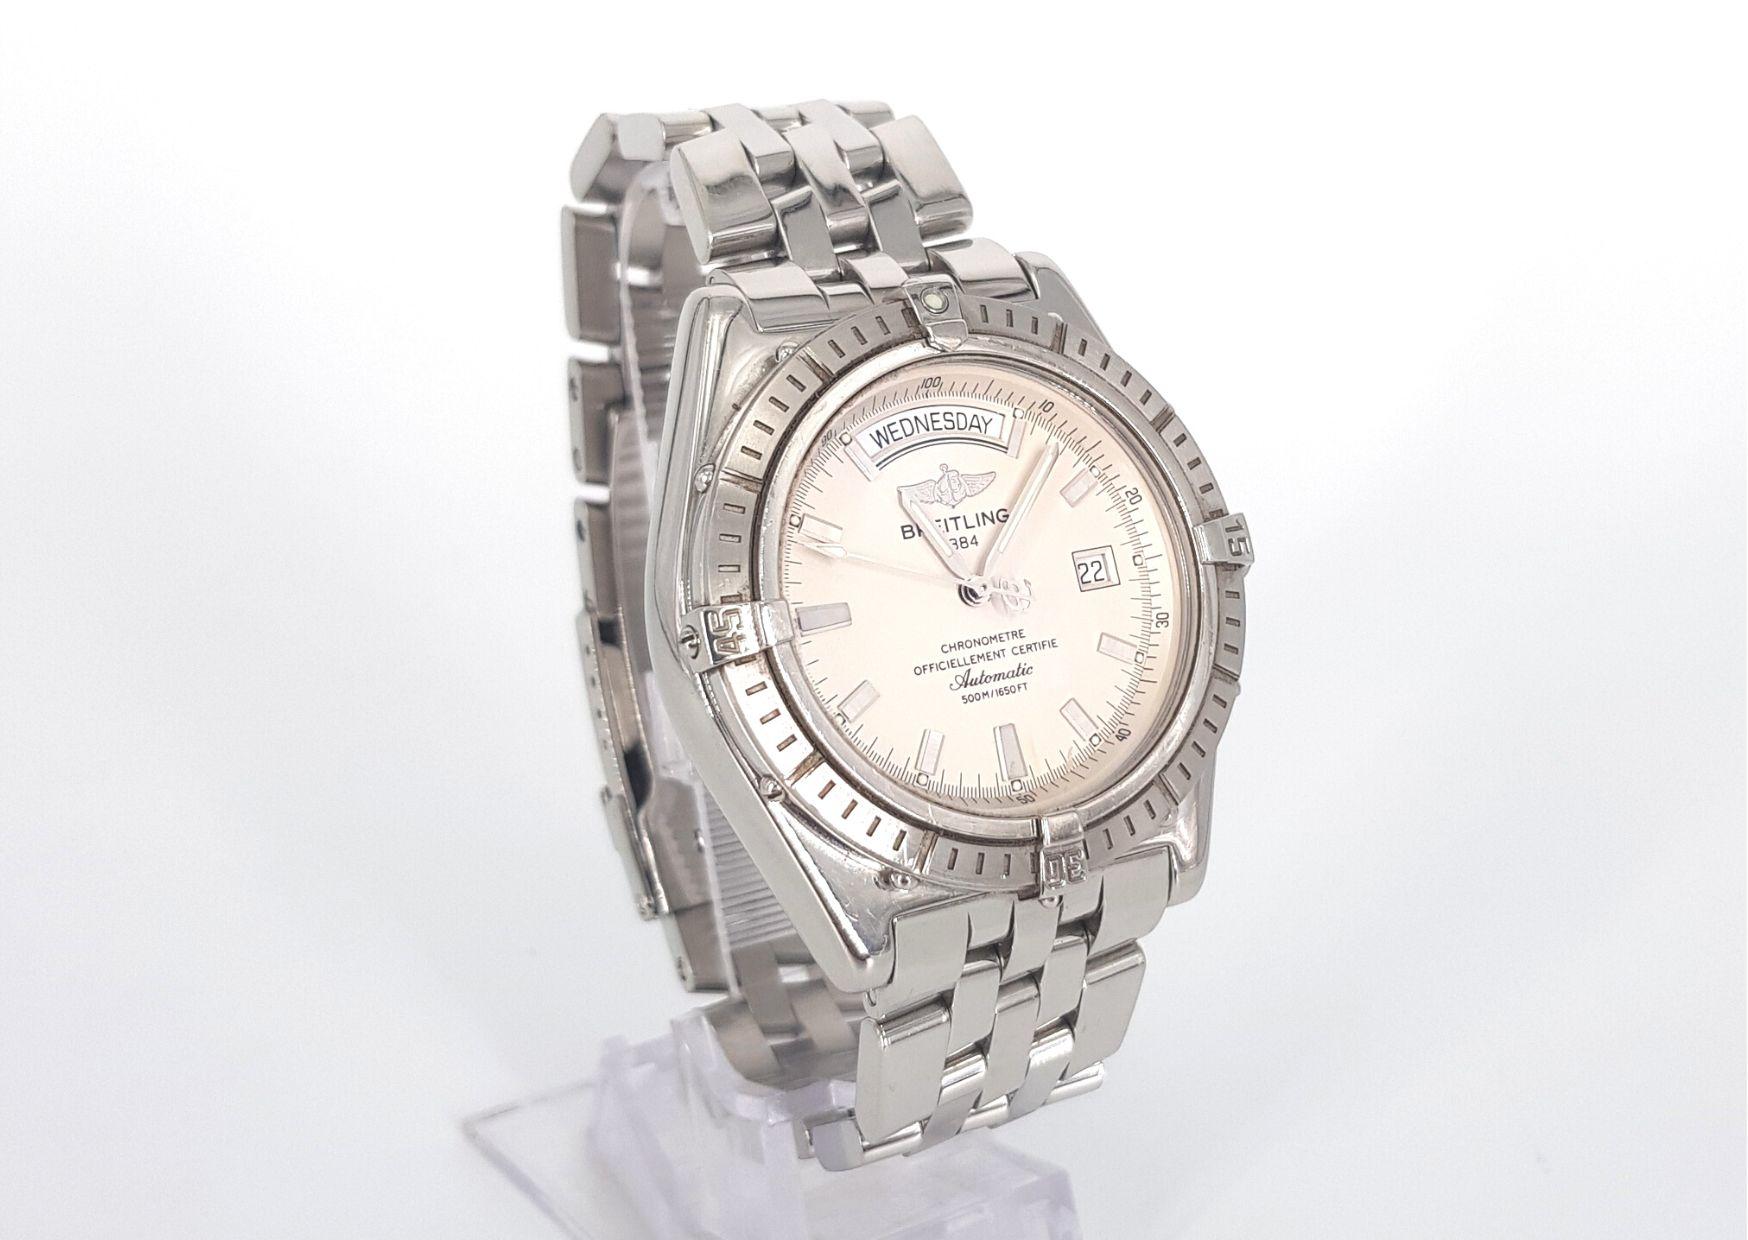 Exceptional.

GENDER:  Male

MOVEMENT: Automatic

CASE MATERIAL: Stainless Steel

DIAL: 40mm

DIAL COLOUR: White

STRAP: 55mm

BRACELET MATERIAL: Stainless steel

CONDITION: 9/10

MODEL NUMBER: A45355

SERIAL NUMBER: TR10ANS2002

YEAR: 2006

BOX –